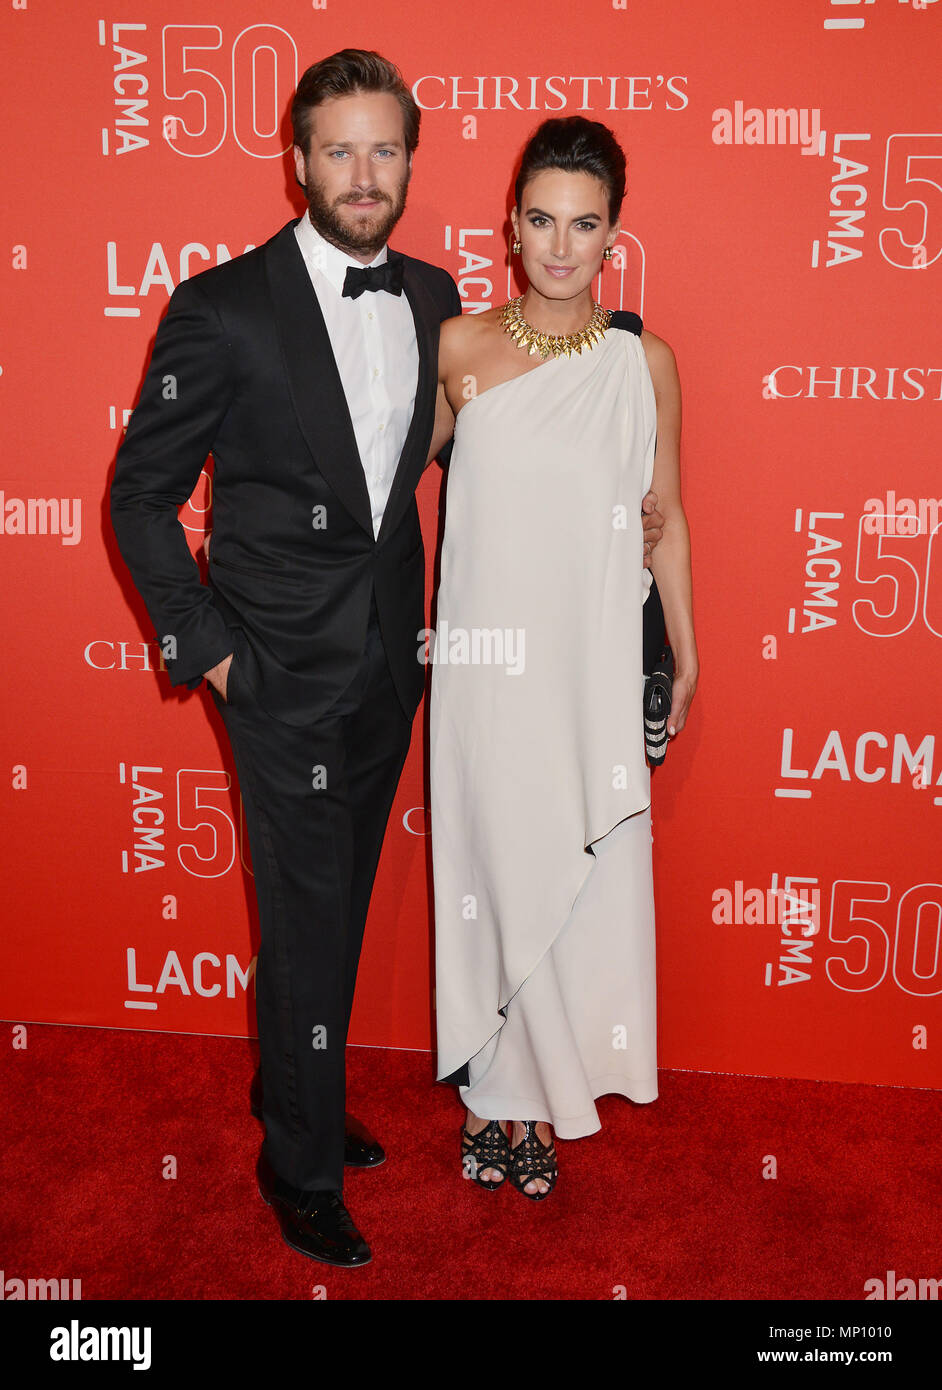 Armie Hammer and Wife Elizabeth Chambers 048 at the  LACMA 50th Ann. Gala 2015 at the LACMA Museum in Los Angeles. April 18, 2015.Armie Hammer and Wife Elizabeth Chambers 048 ------------- Red Carpet Event, Vertical, USA, Film Industry, Celebrities,  Photography, Bestof, Arts Culture and Entertainment, Topix Celebrities fashion /  Vertical, Best of, Event in Hollywood Life - California,  Red Carpet and backstage, USA, Film Industry, Celebrities,  movie celebrities, TV celebrities, Music celebrities, Photography, Bestof, Arts Culture and Entertainment,  Topix, vertical,  family from from the ye Stock Photo